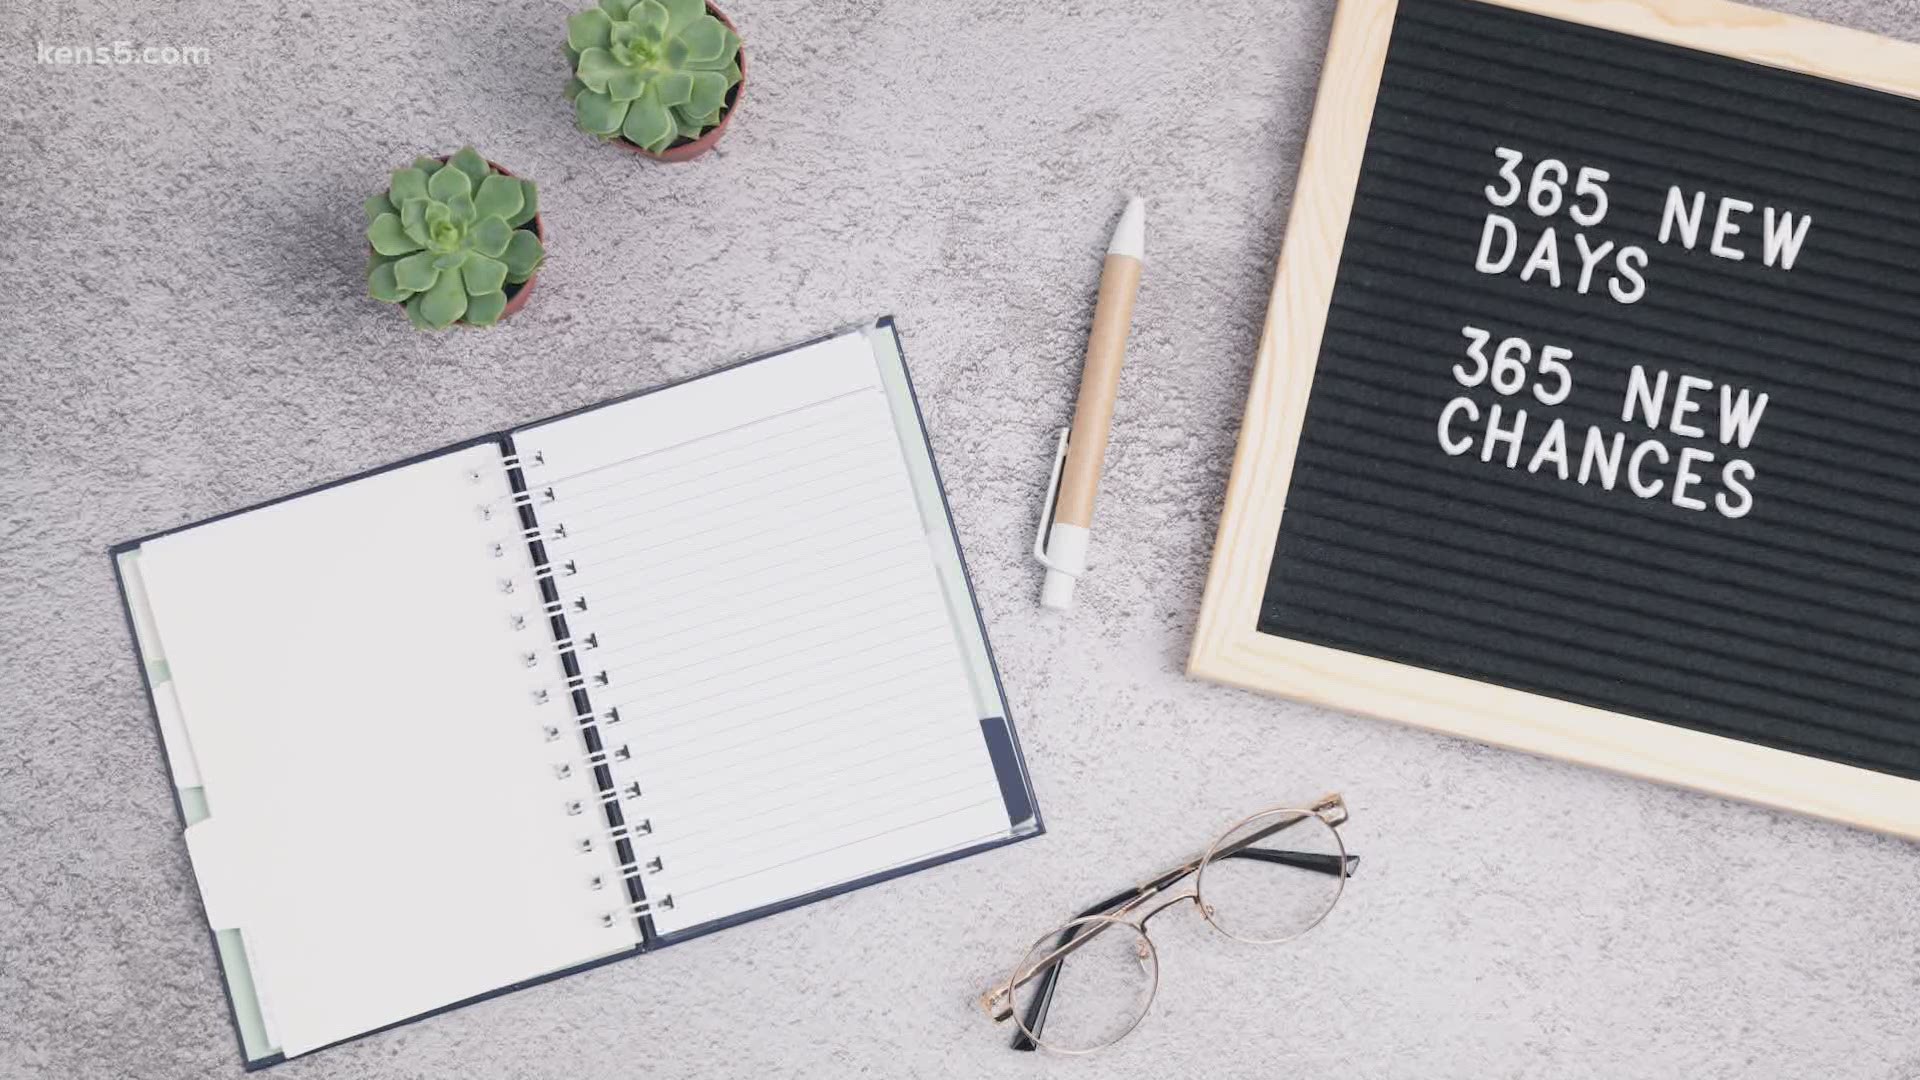 Digital Journalist Megan Ball shares how you can make and keep your 2021 resolutions with a little strategy and determination.